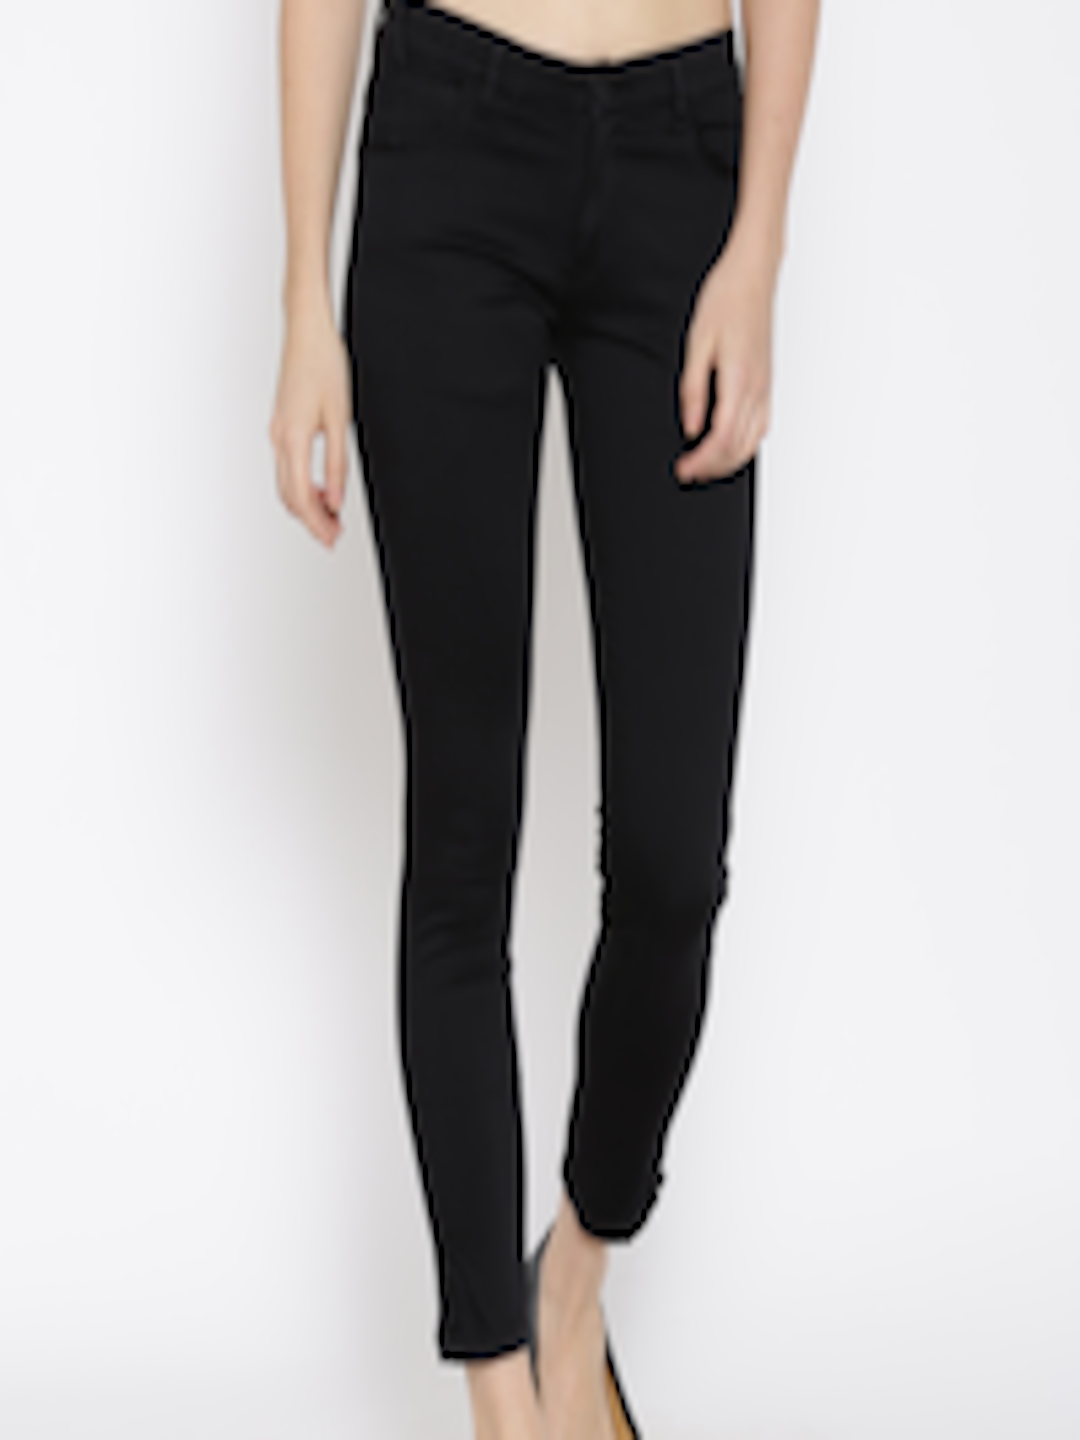 Buy Devis Black Slim Fit Casual Trousers - Trousers for Women 1398880 ...